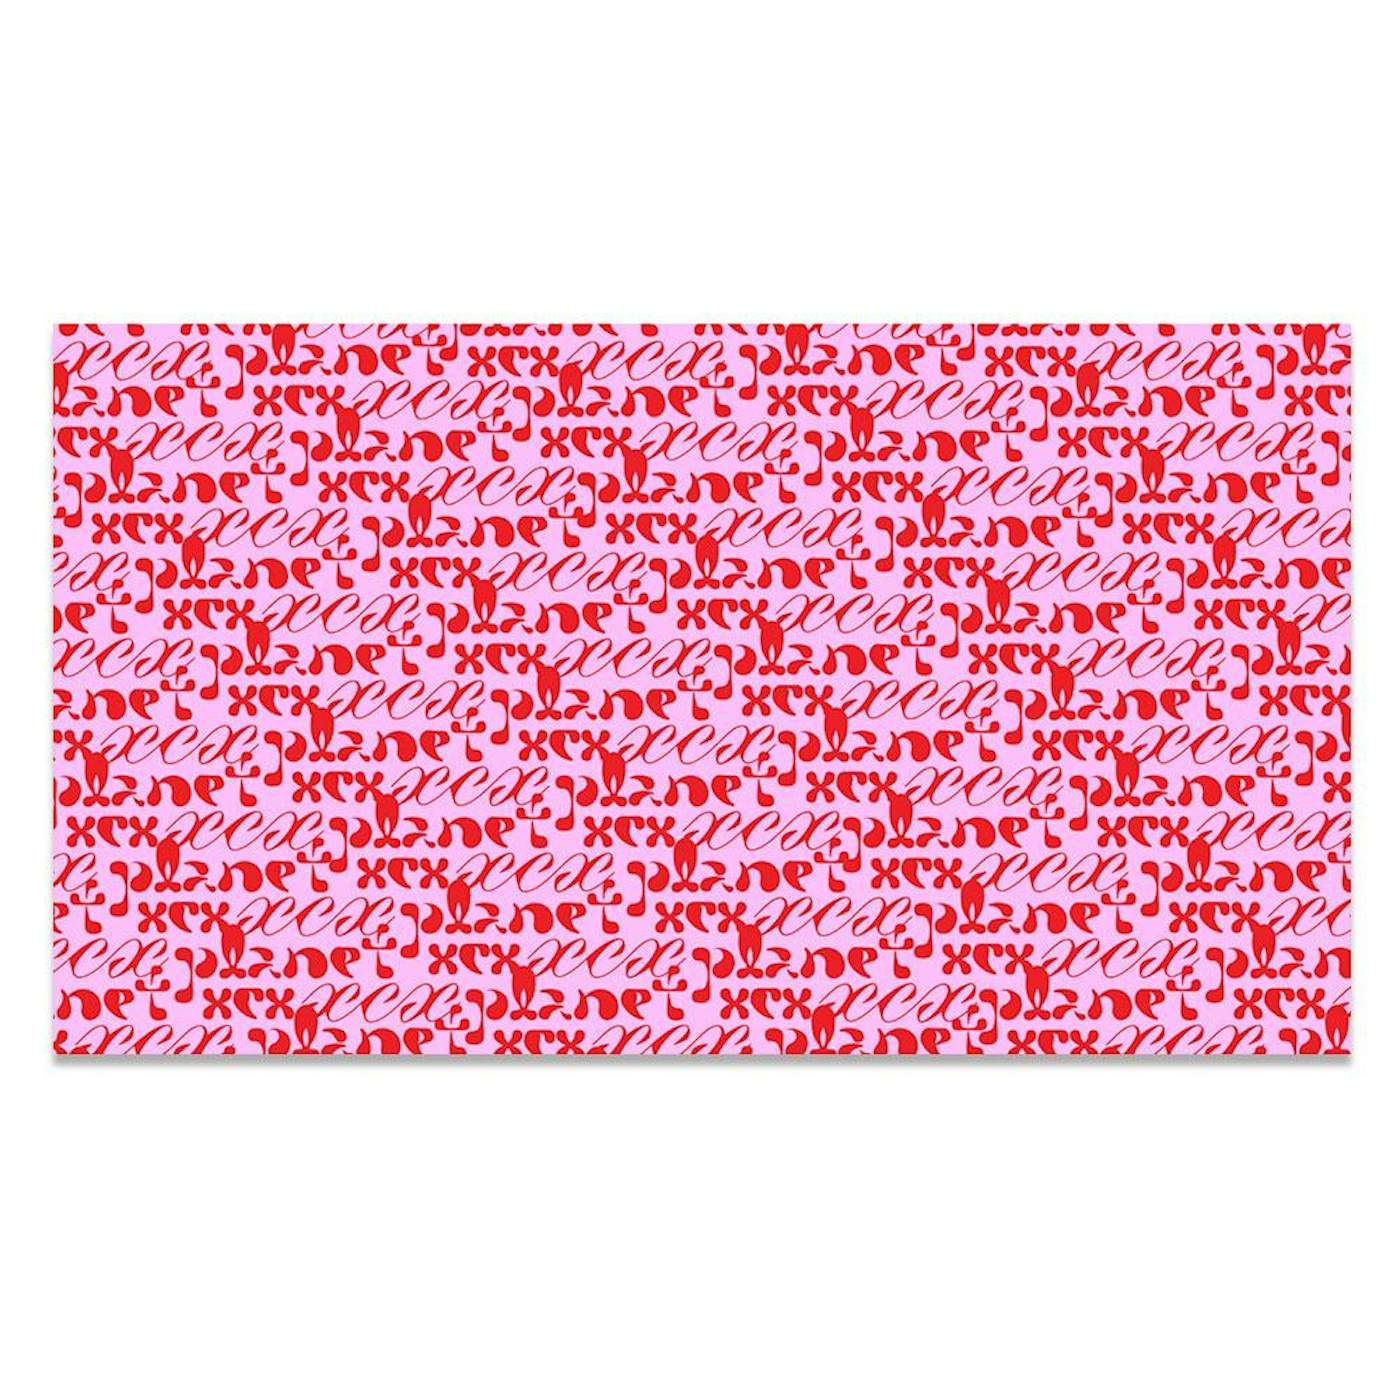 Charli XCX PLANET XCX WRAPPING PAPER